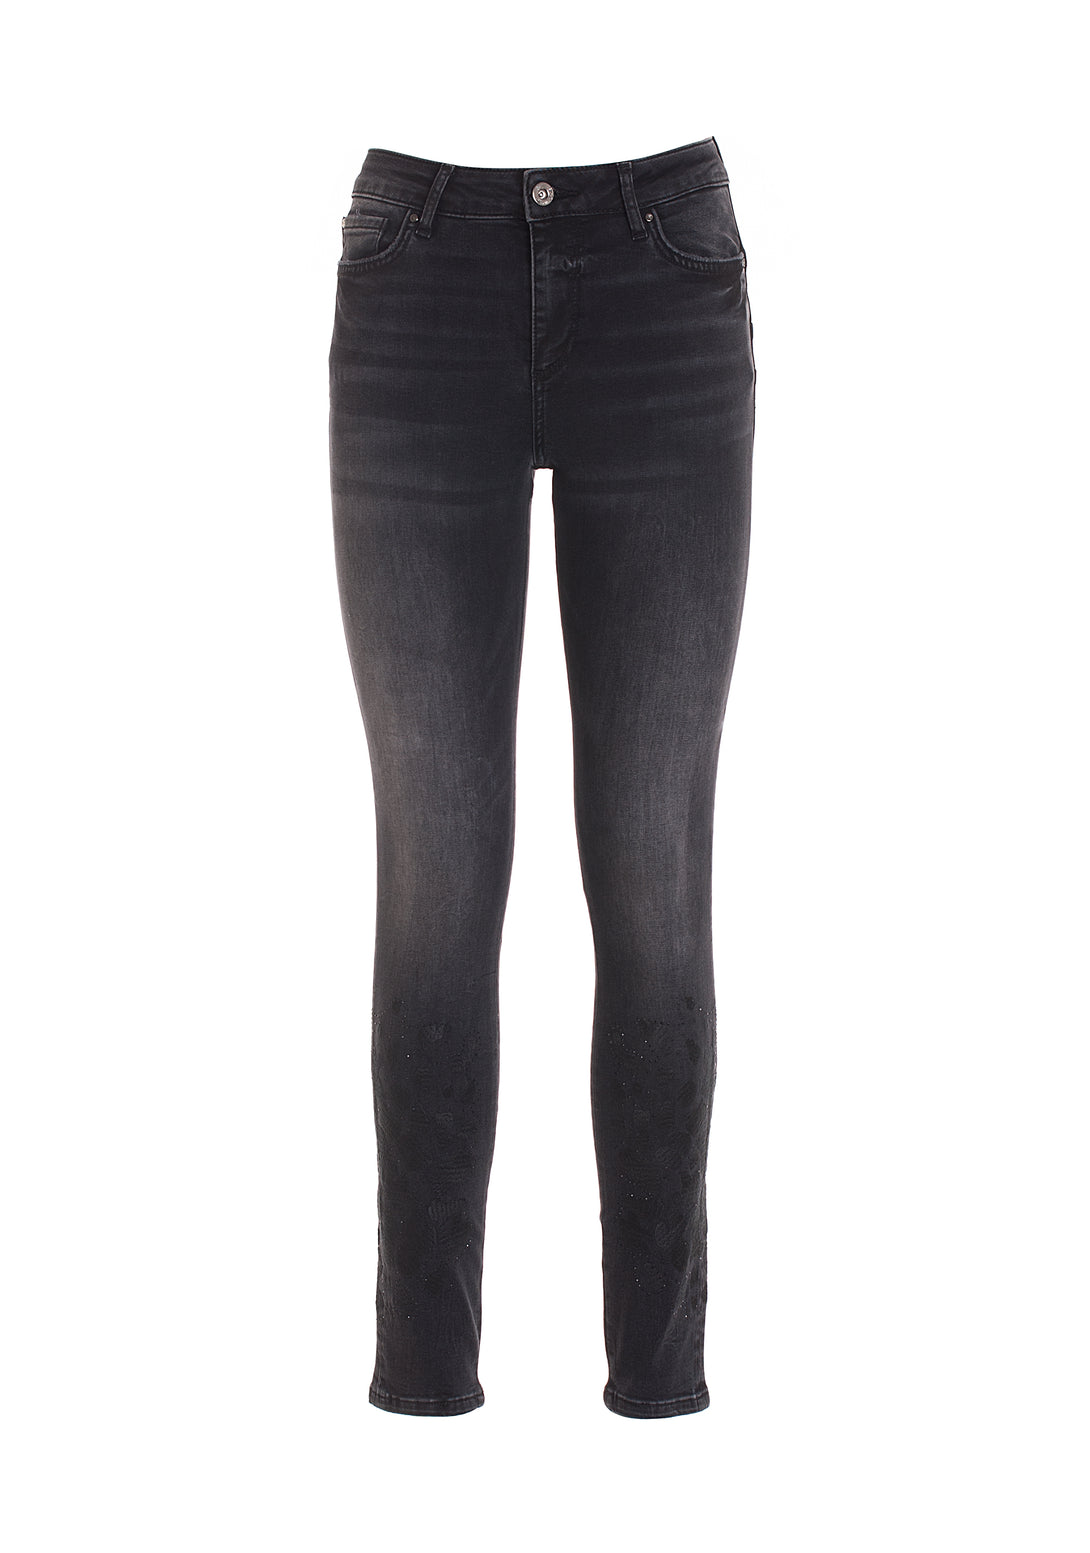 Jeans skinny fit with push-up effect made in black denim with middle wash Fracomina FP22WV1001D40104-H21